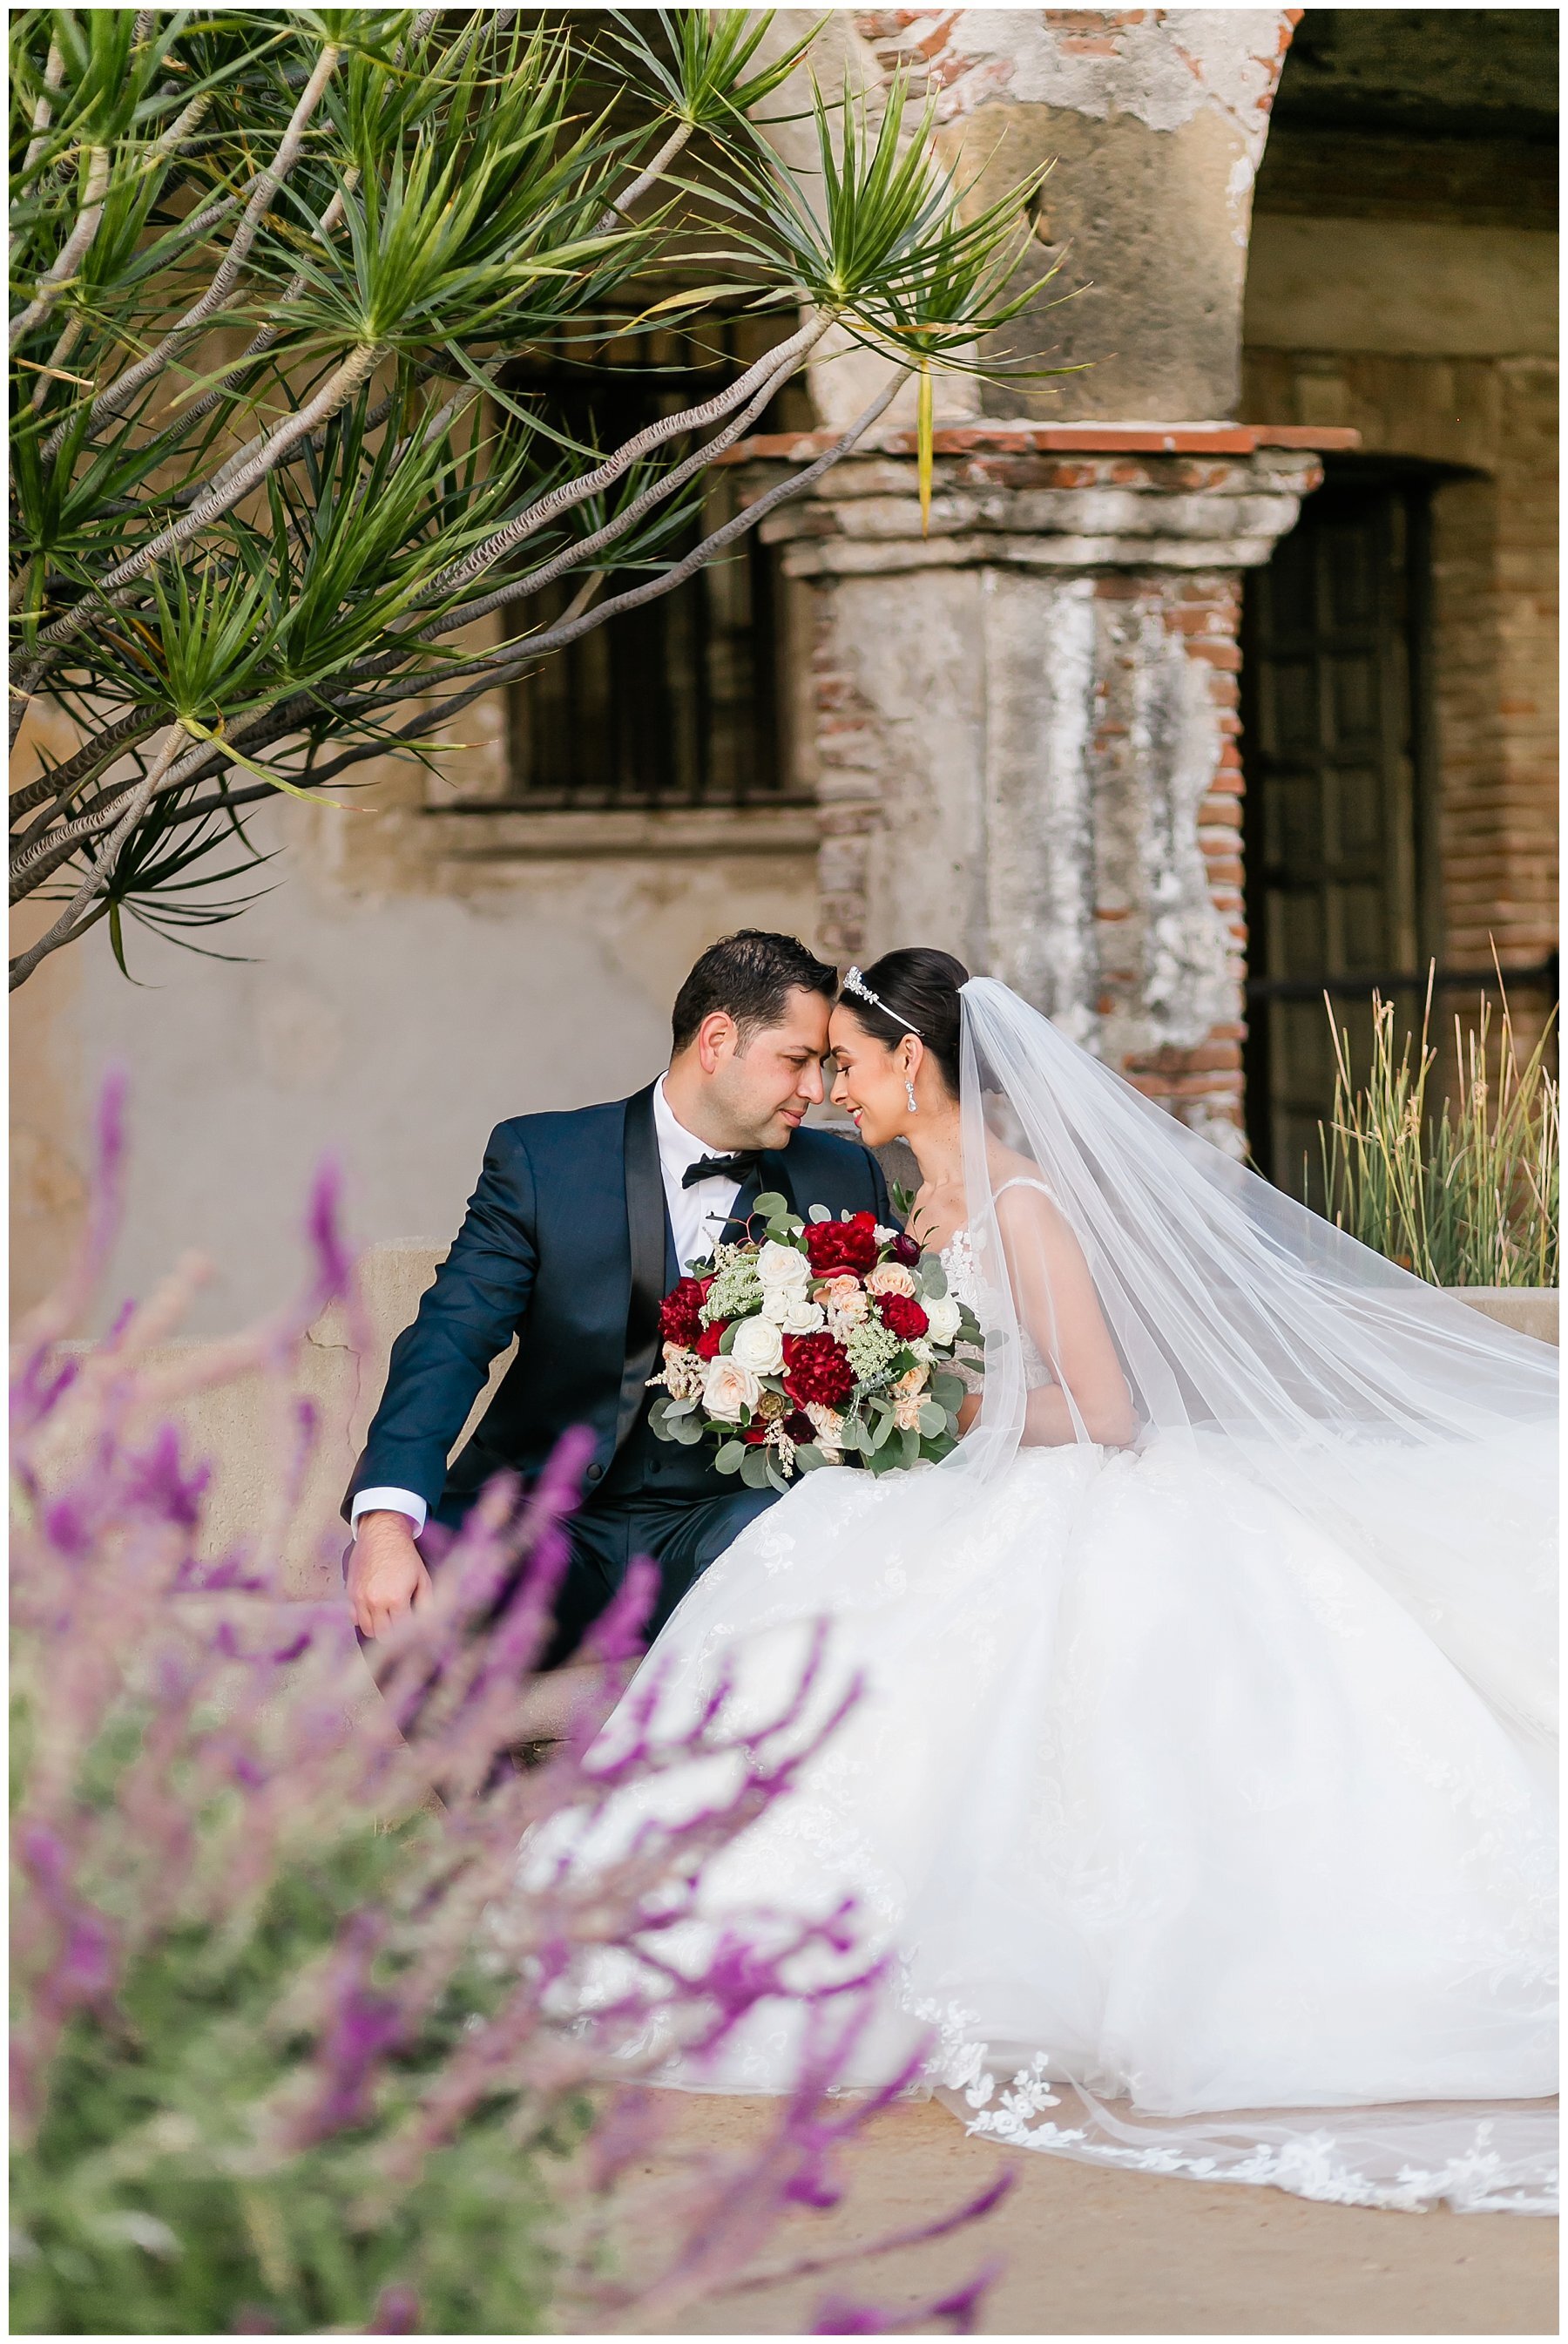  bride and groom touching foreheads in the courtyard with archways and greenery 